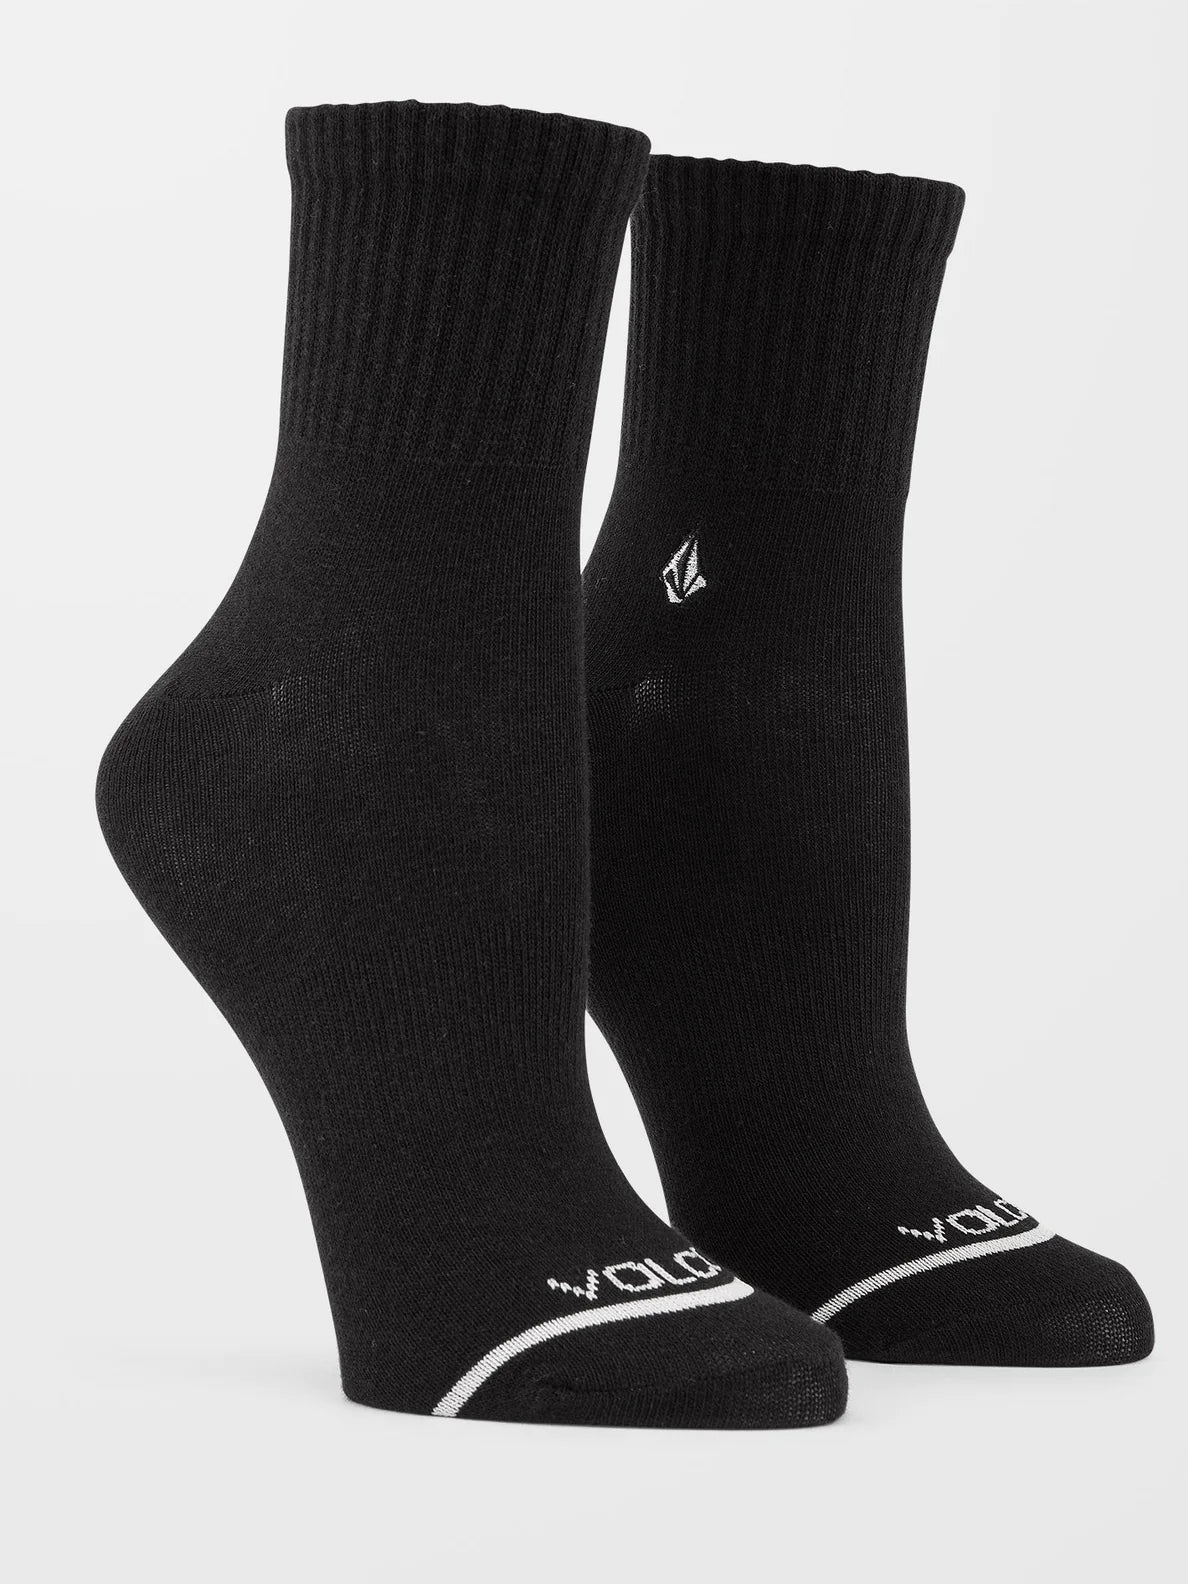 Chaussettes Volcom The New Crew pour Femmes - Multi (Pack 3)